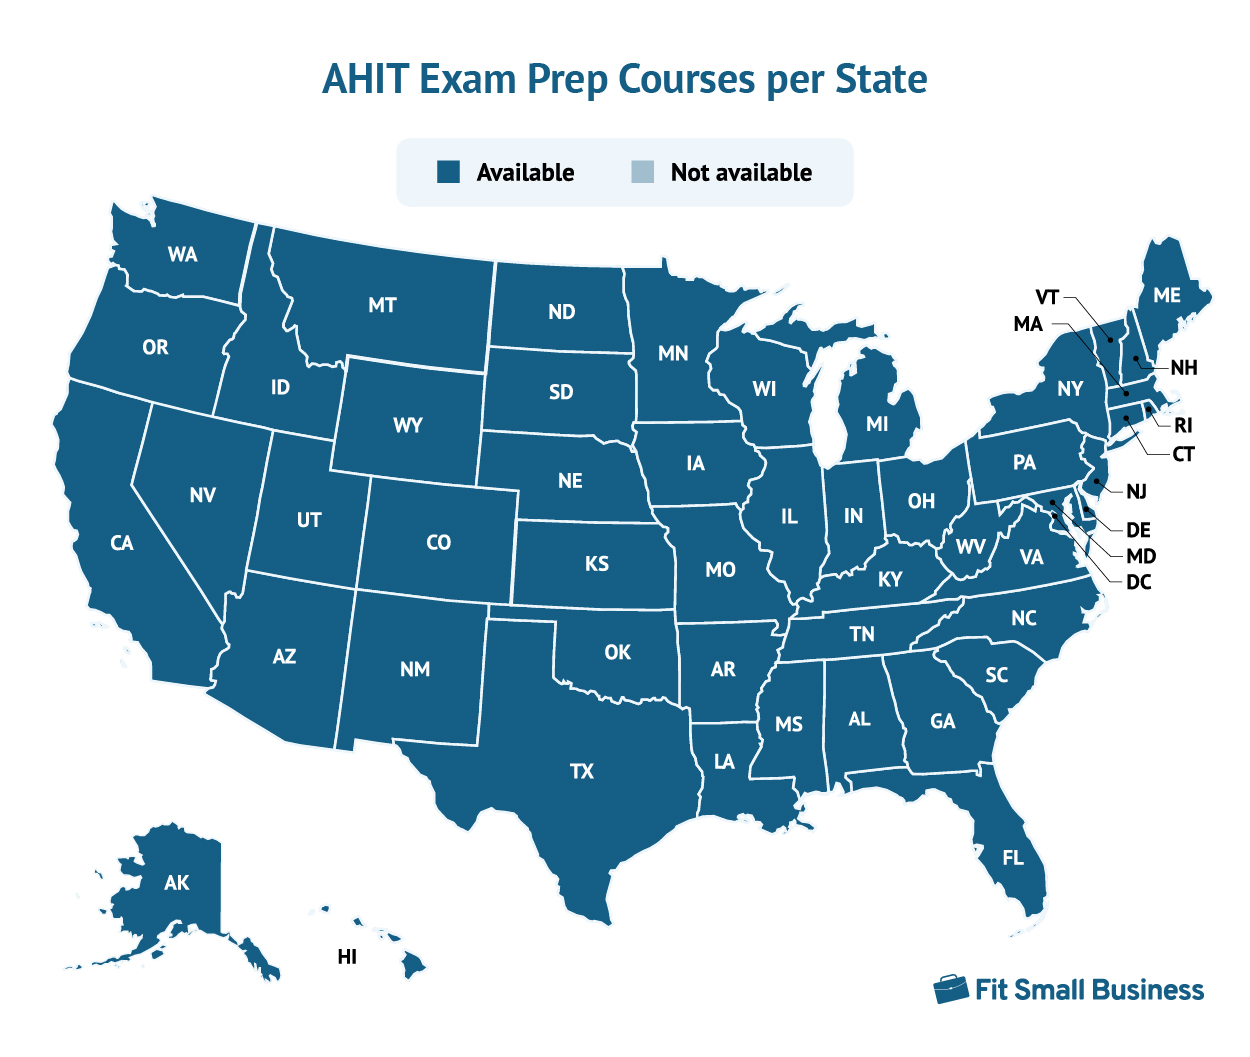 The map showing for a AHIT Exam Prep Courses per State.